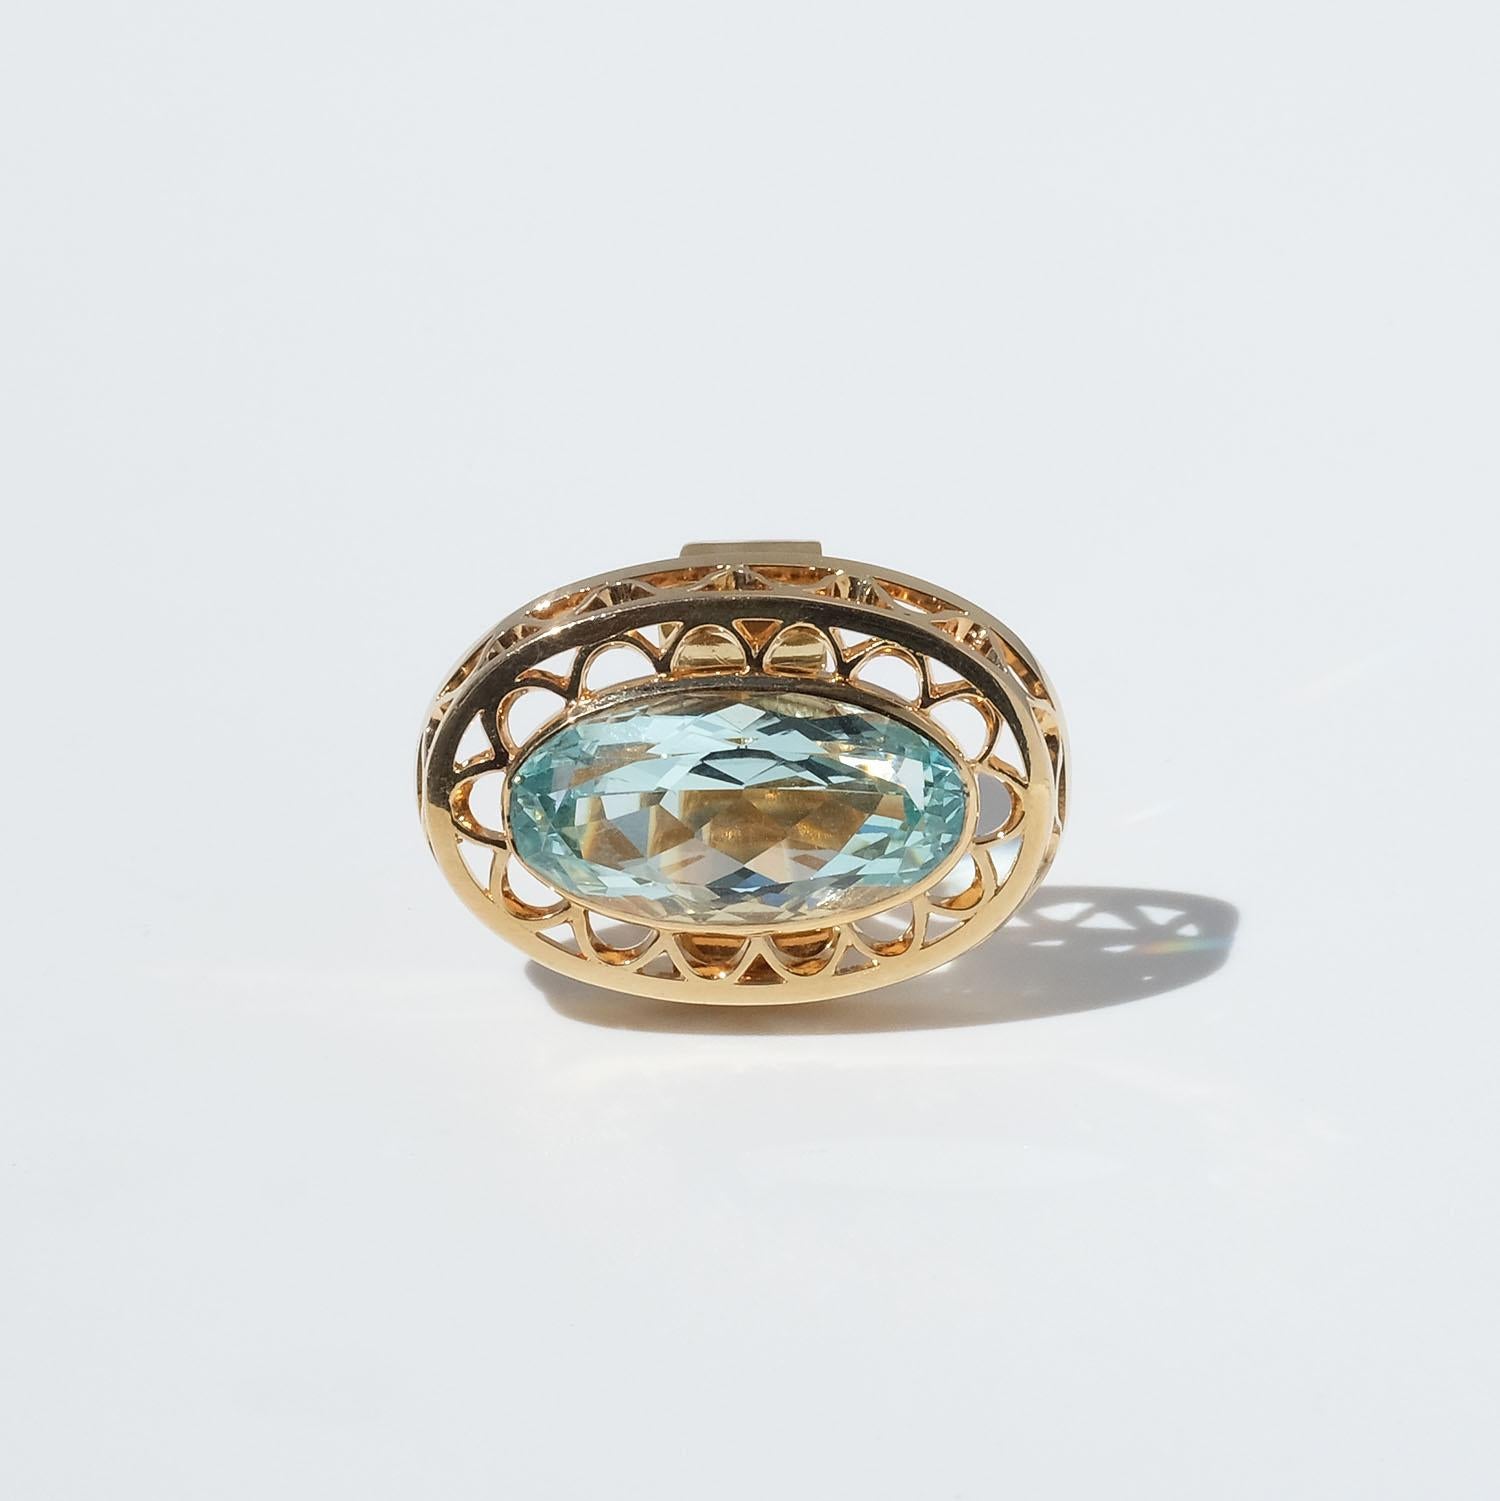 Vintage 18k Gold and Aquamarine Ring by Master Anders Högberg Year, 1977 For Sale 4